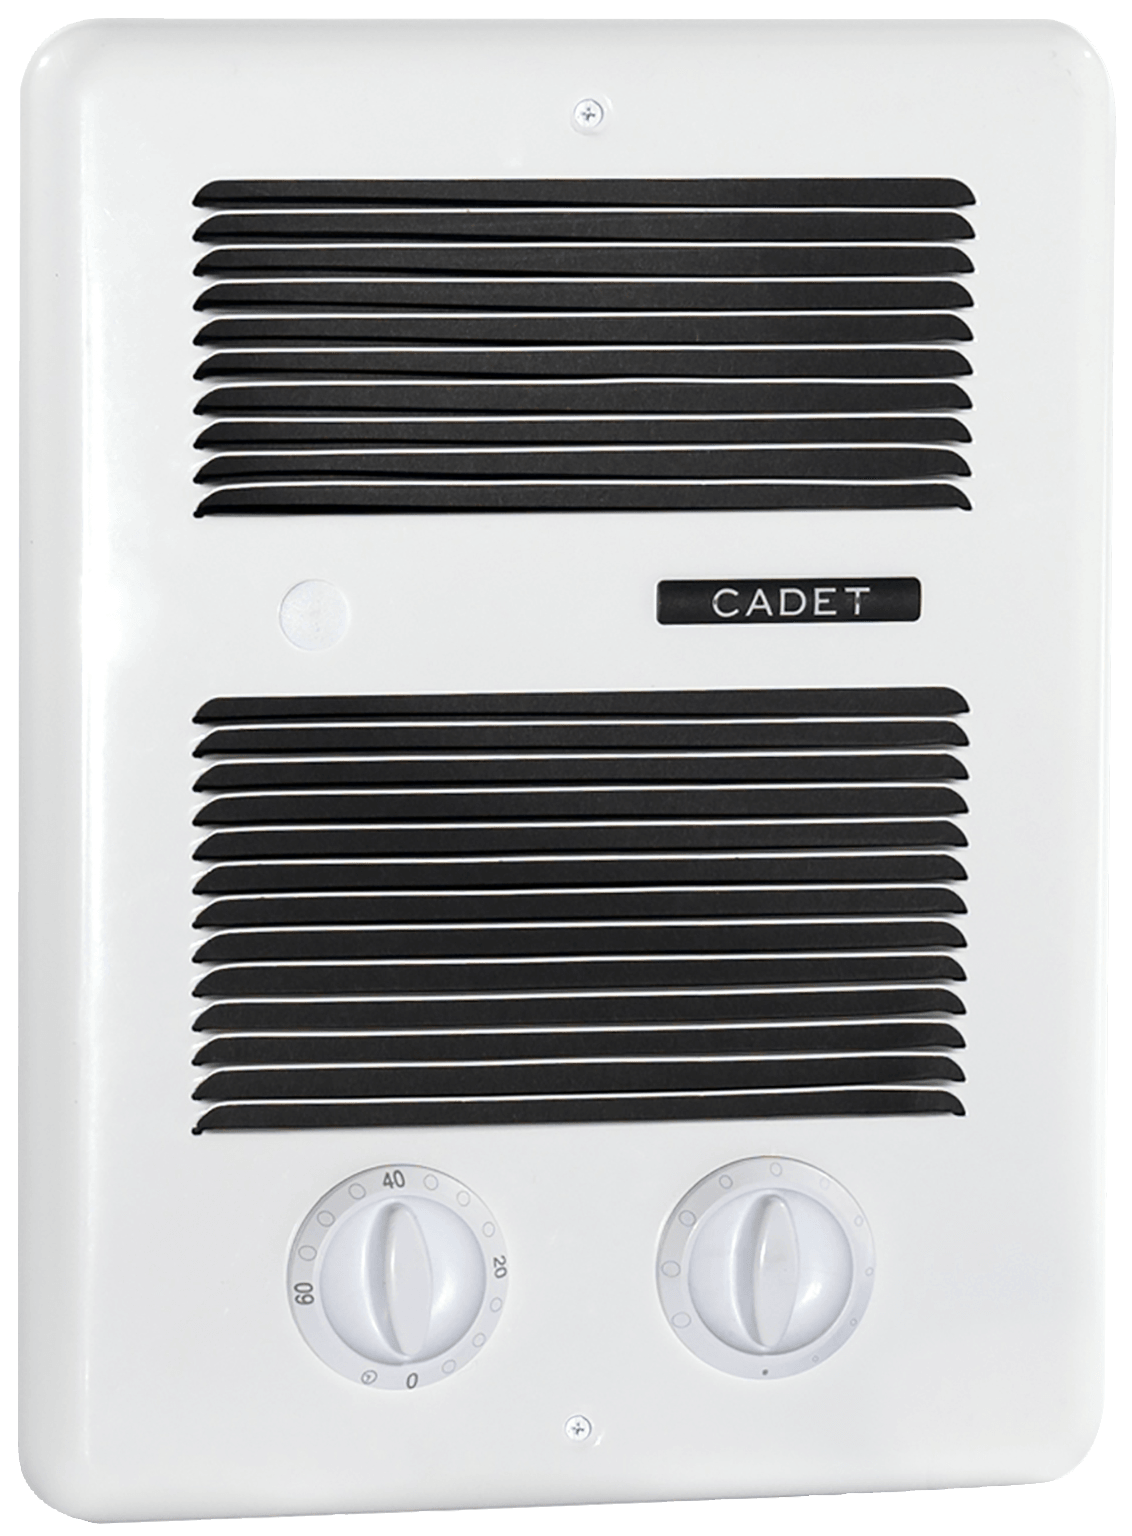 Dimplex Bathroom Fan Heater with Built-In Thermostat and Timer, Model CBC132TW - Orka